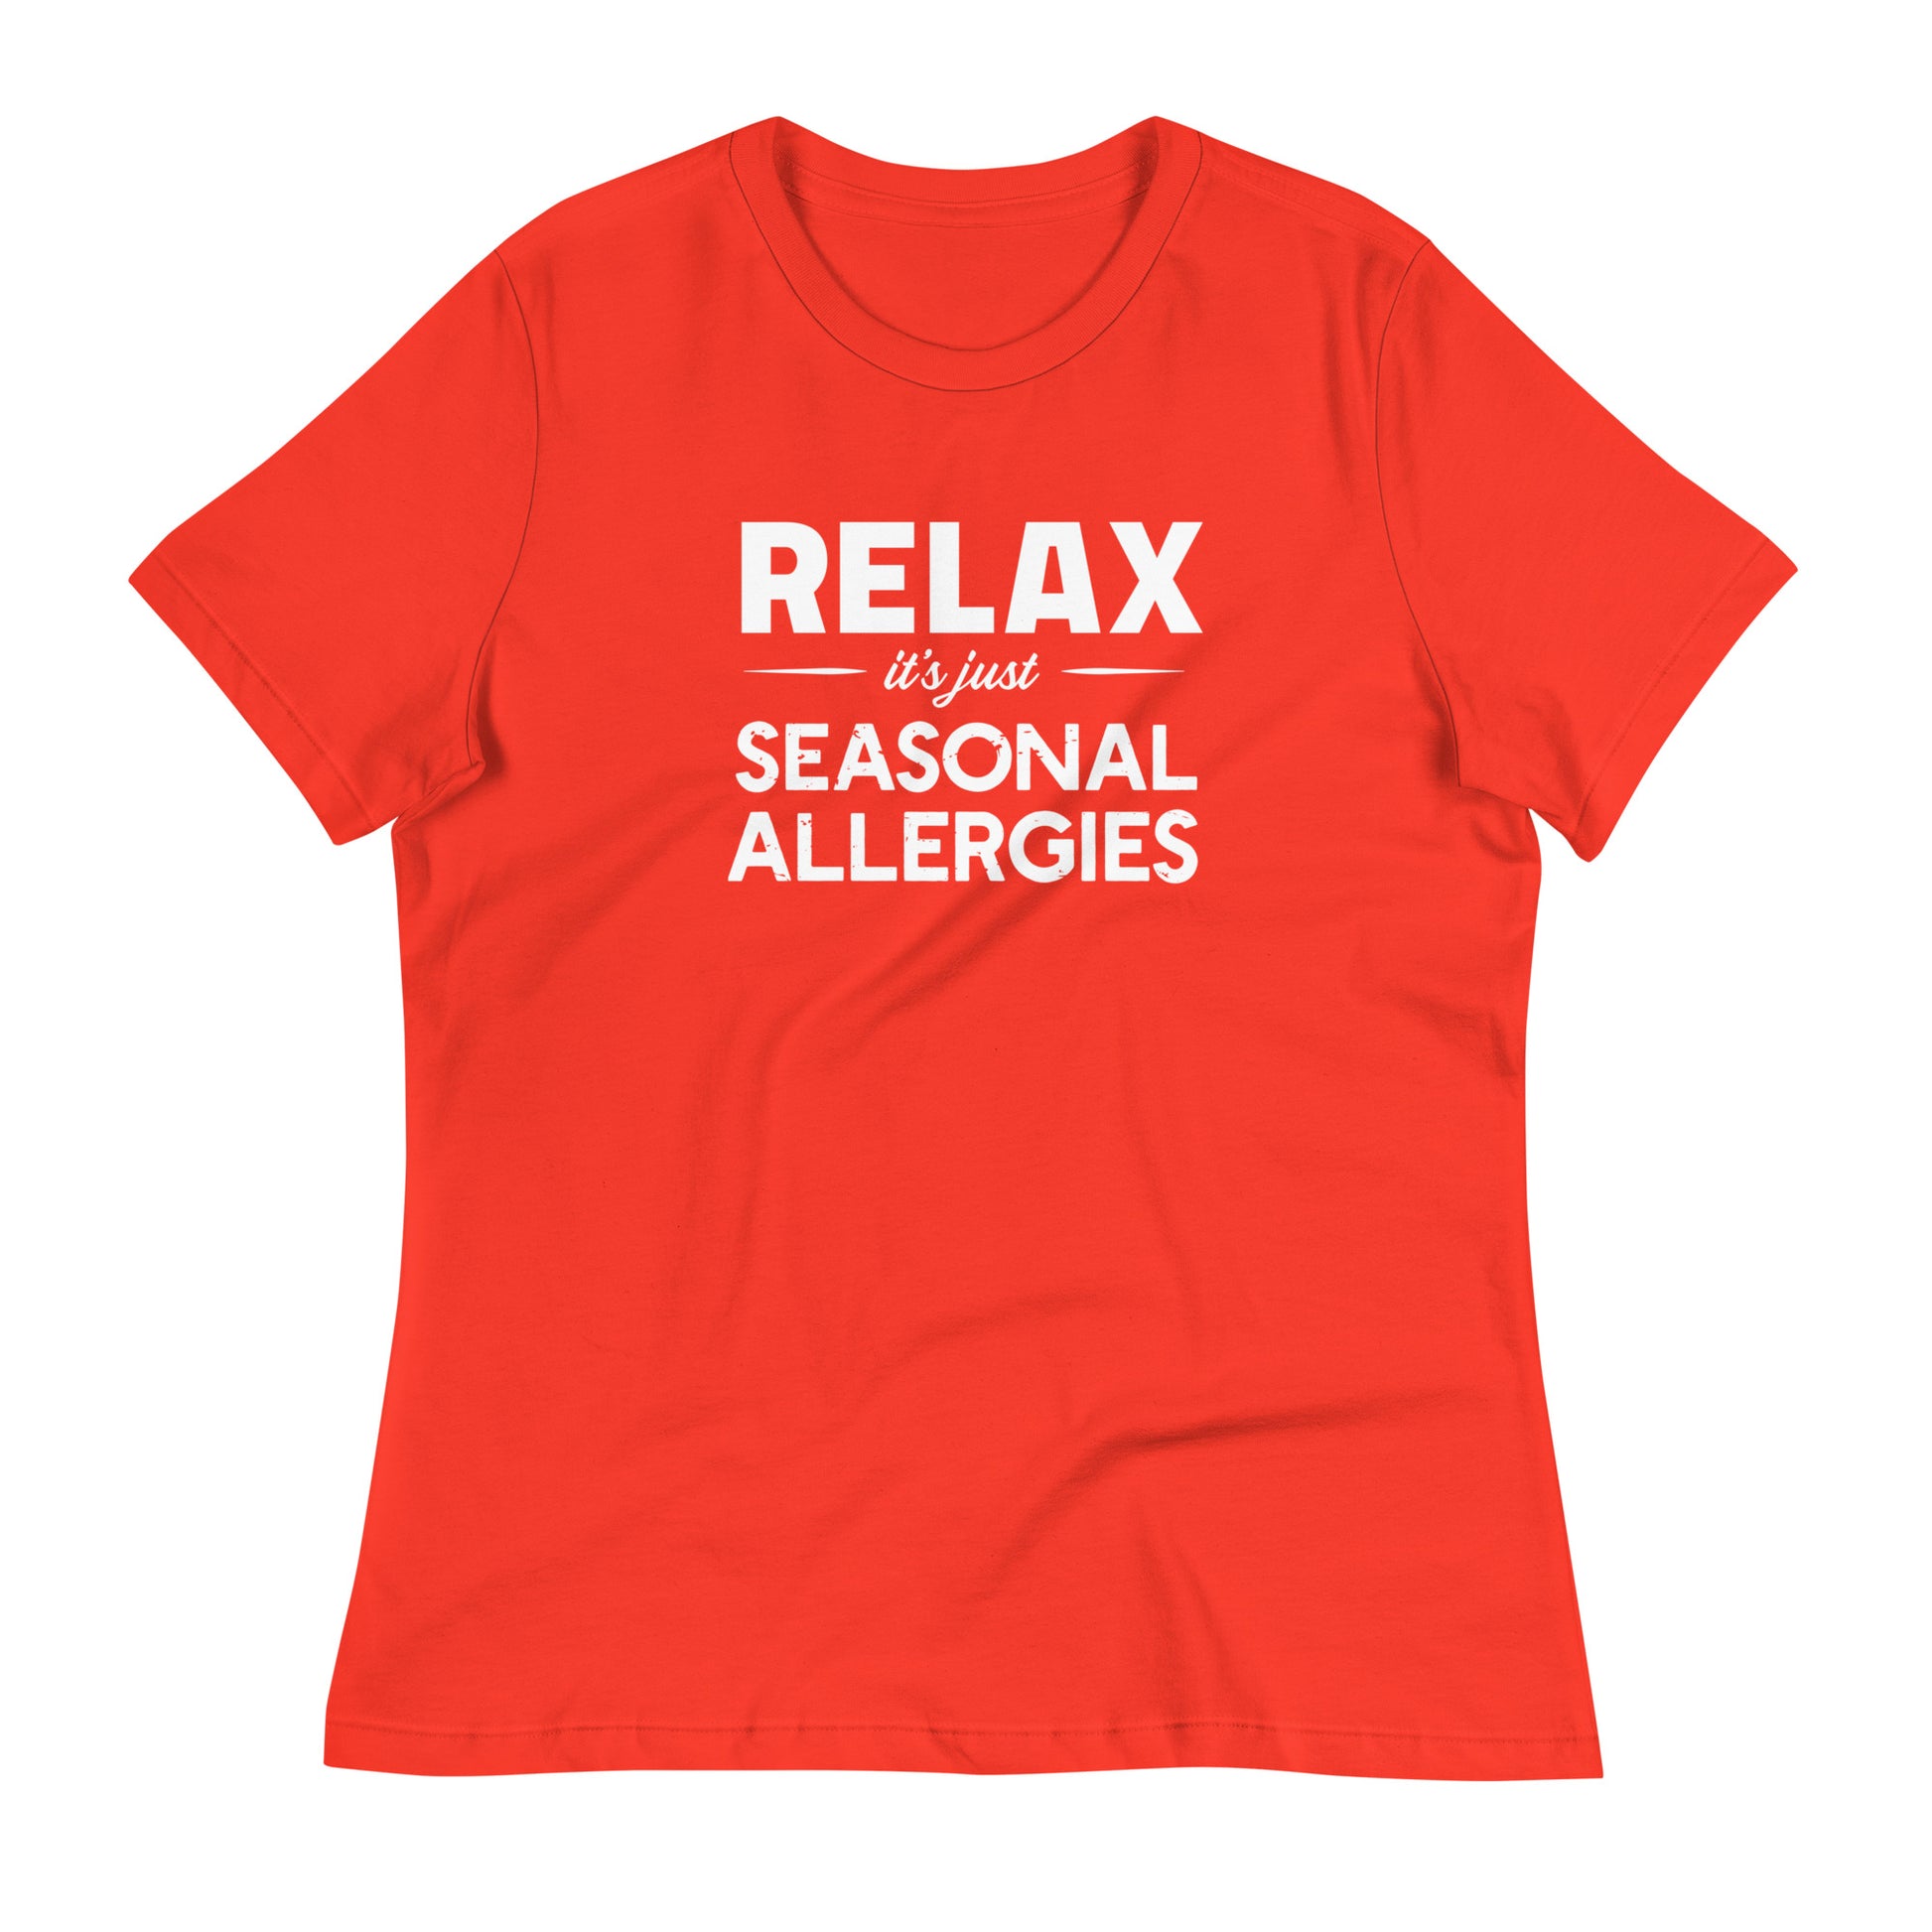 Poppy (bright red) women's relaxed fit t-shirt with white graphic: "RELAX it's just SEASONAL ALLERGIES"